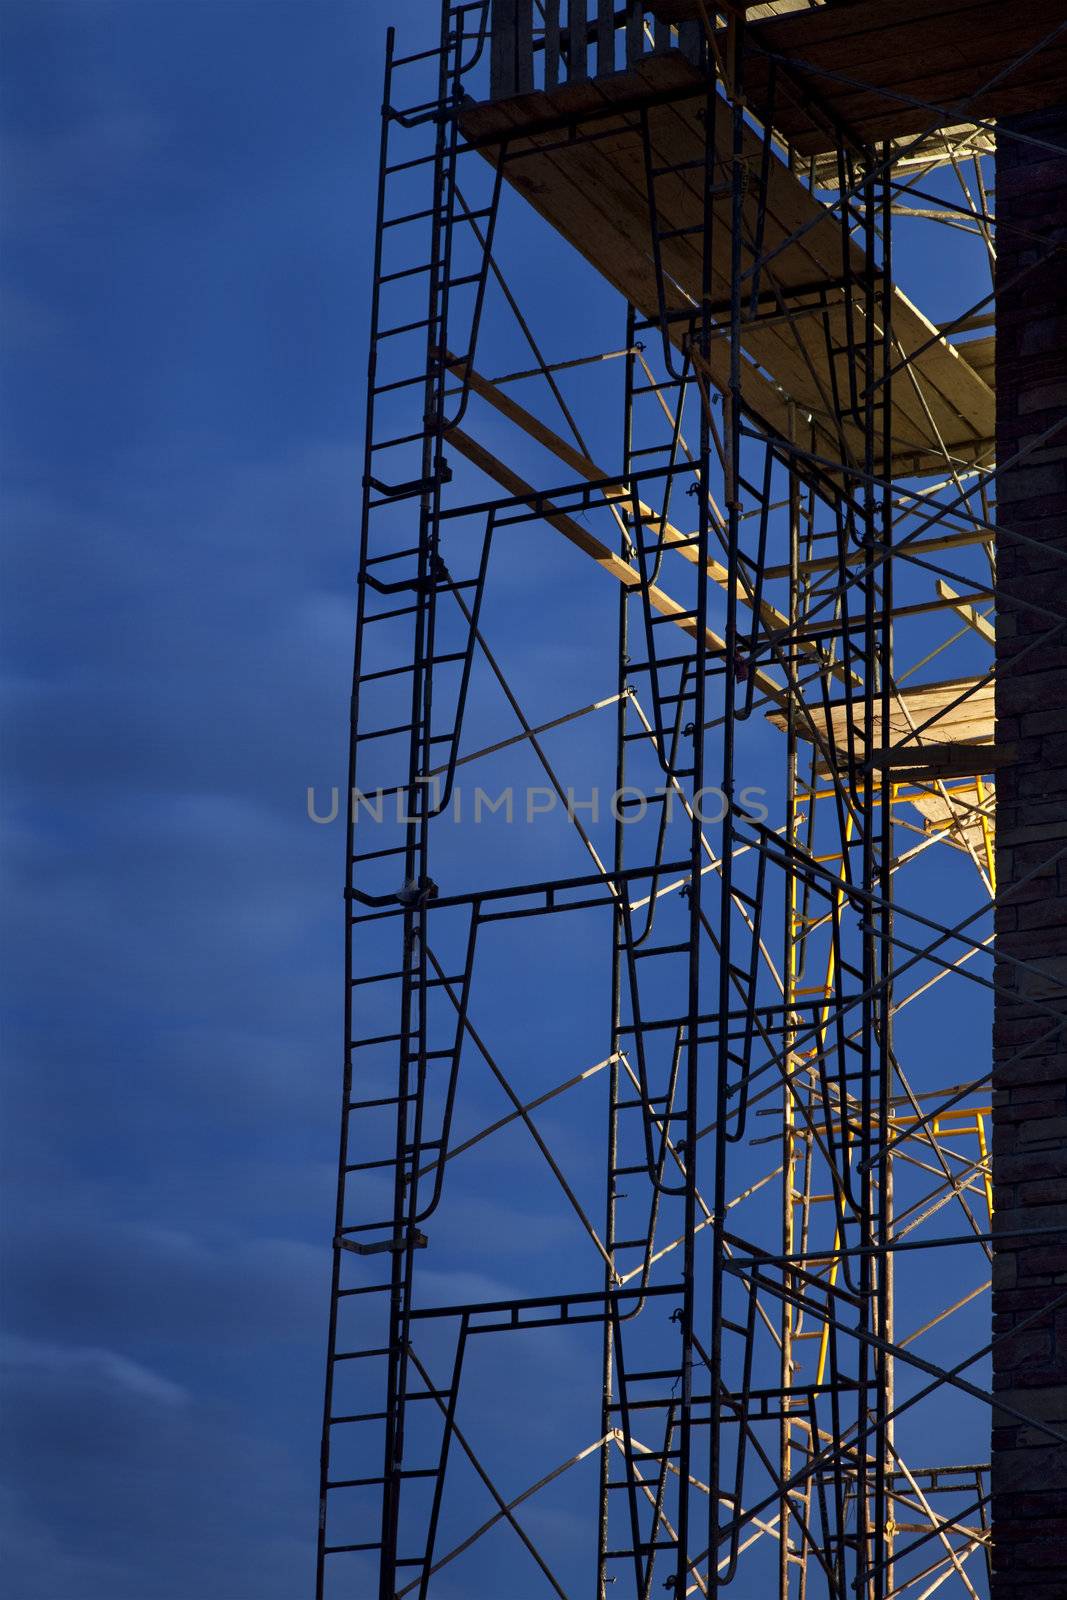 construction scaffolding against nighttime sky by PixelsAway